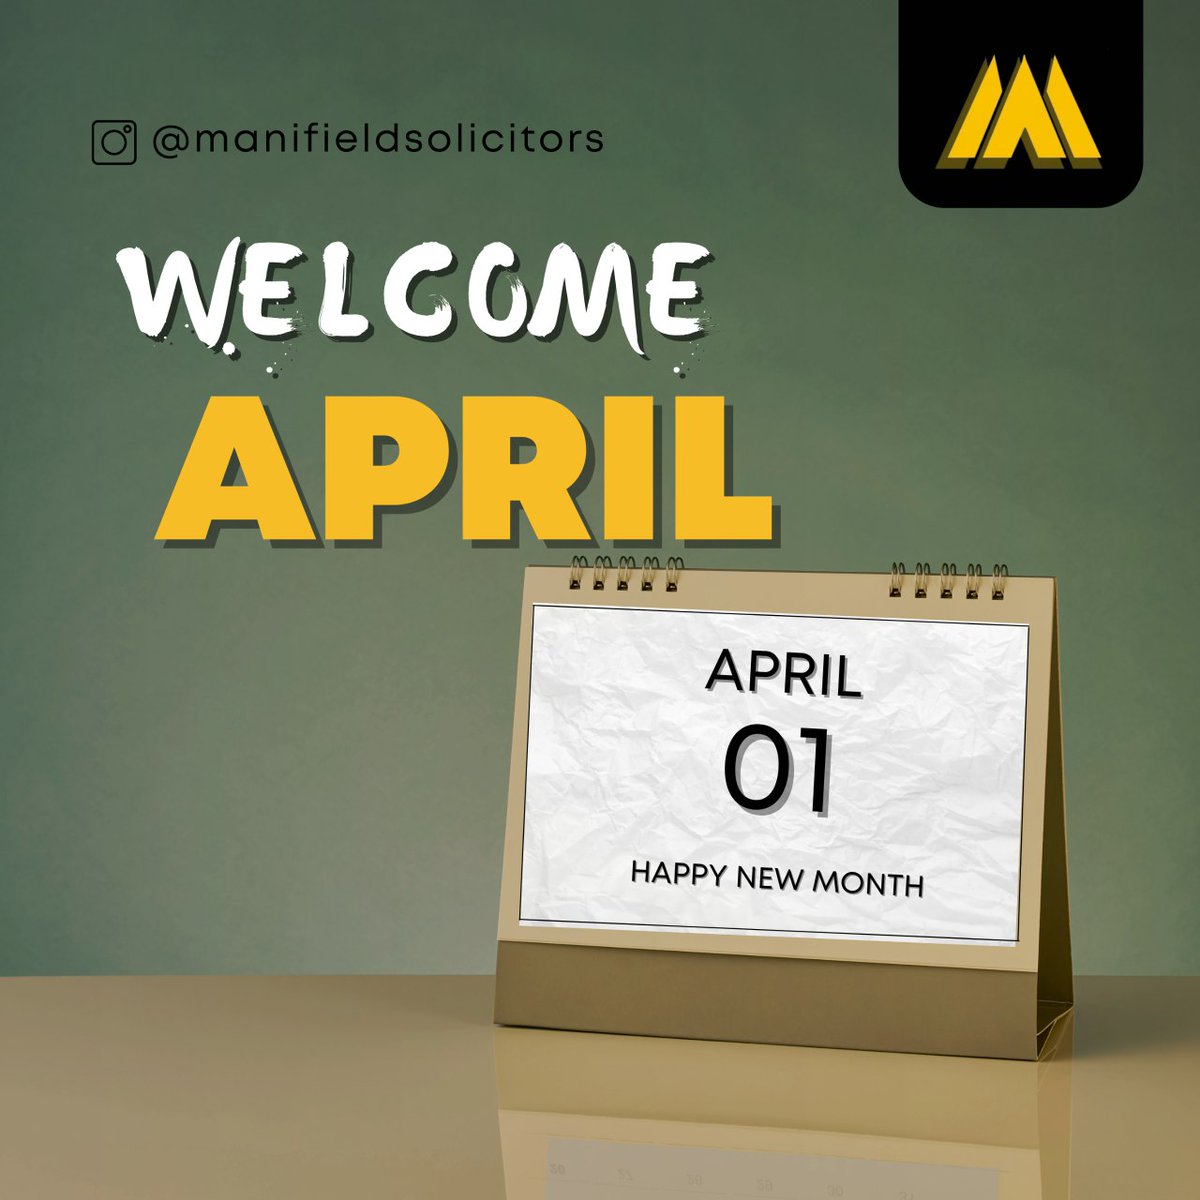 Happy New Month! As April blooms with new opportunities, Manifield Solicitors wishes you a month filled with success, growth, and legal victories. Let's continue to strive for justice and excellence together.

#HappyNewMonth #AprilWishes #ManifieldSolicitors #LegalExcellence